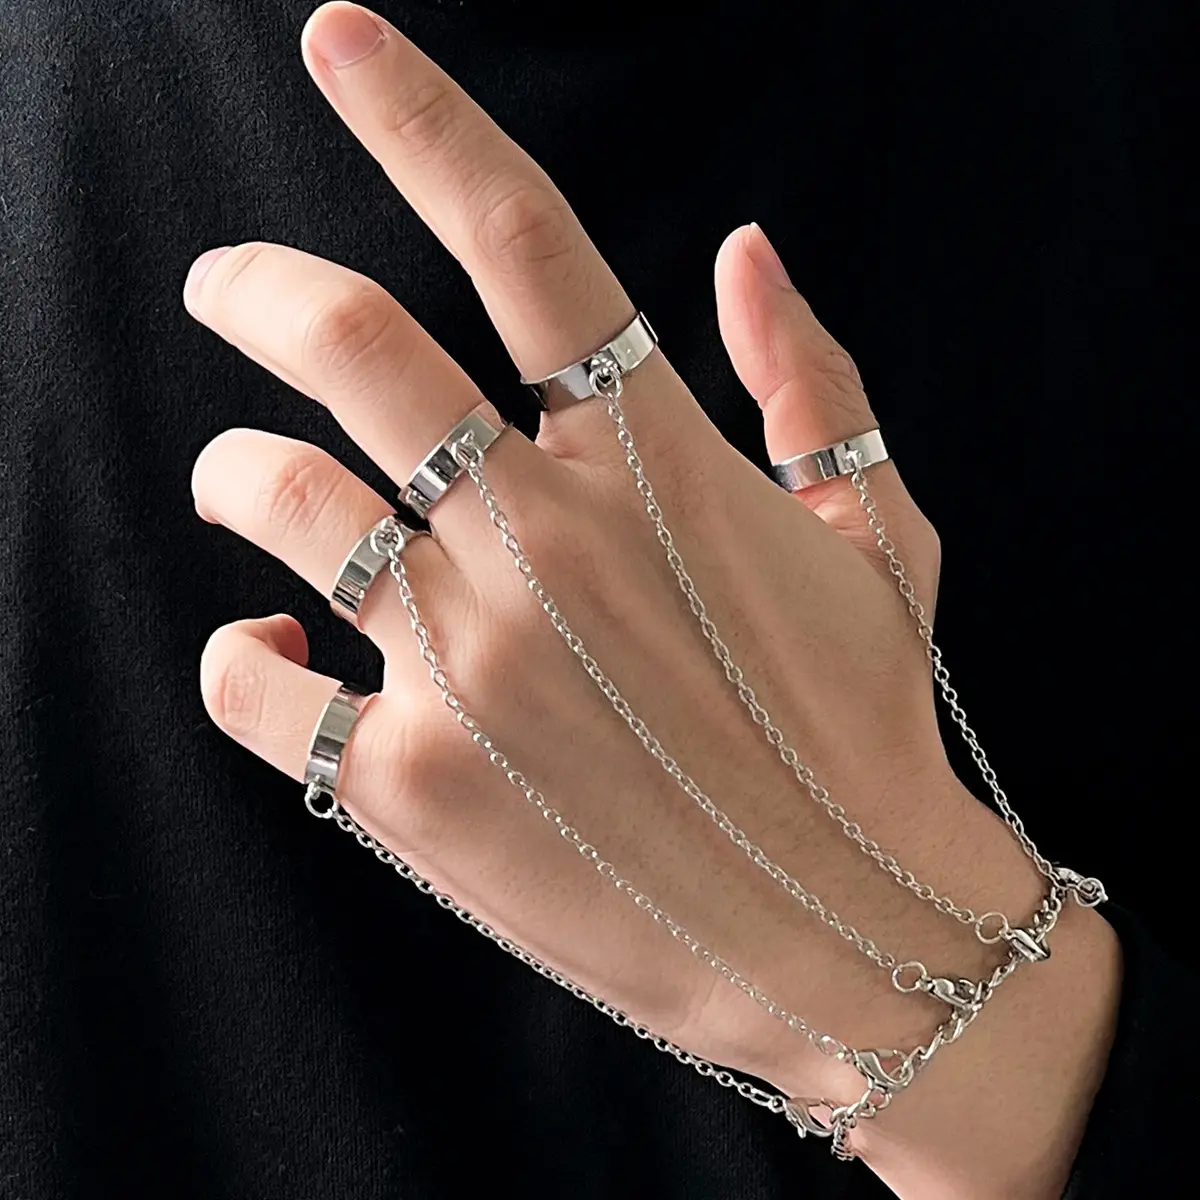 Personalized Fashion Trend Punk Geometric Silver Color Chain Wrist Bracelet For Women Men Ring Charm Set Couple Jewelry Gifts